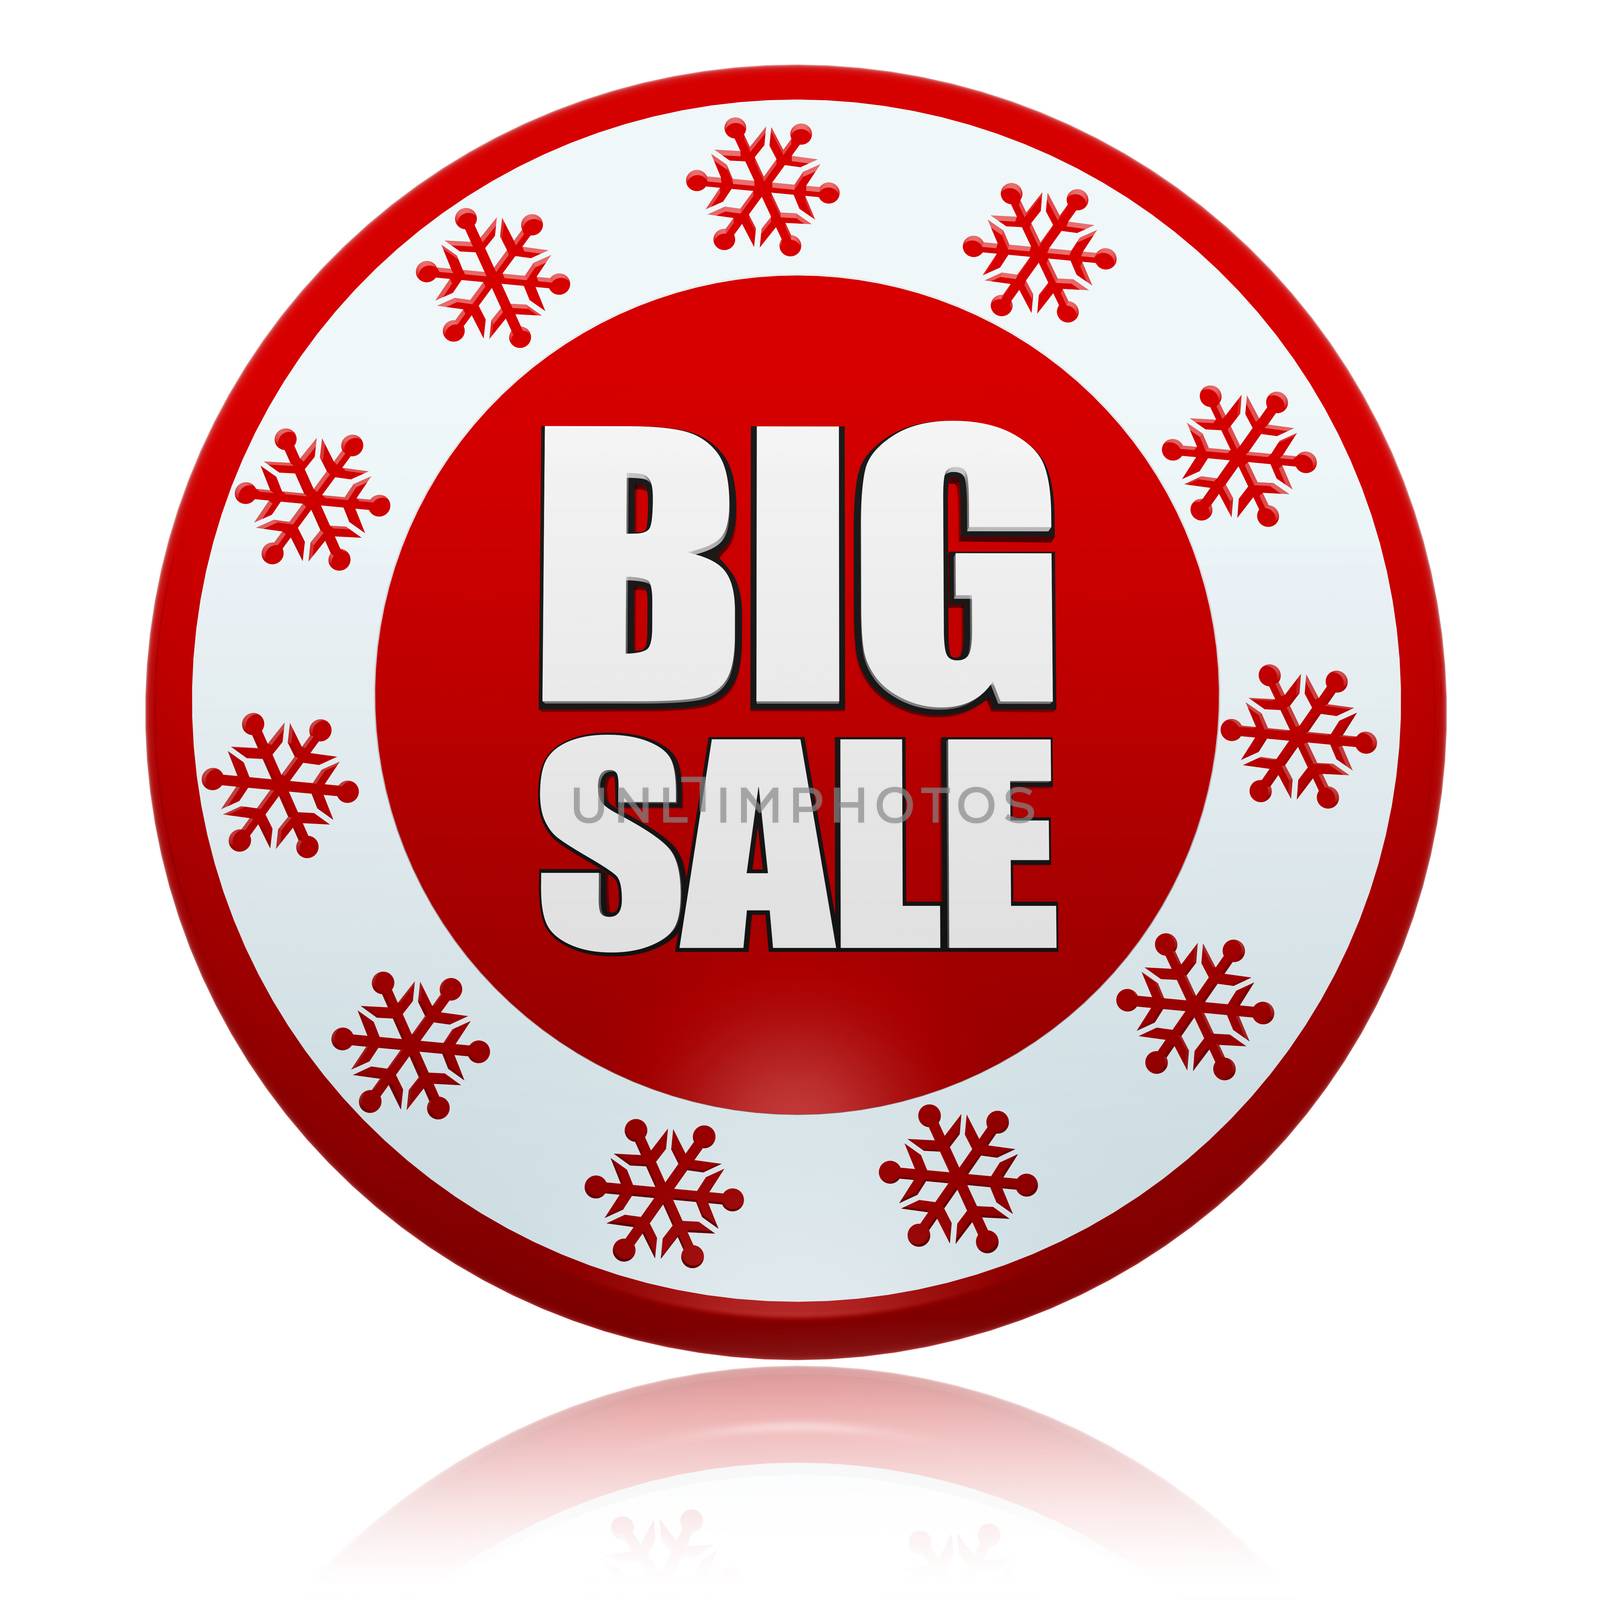 christmas big sale - 3d red circle banner with white text and snowflakes symbols, business holiday concept